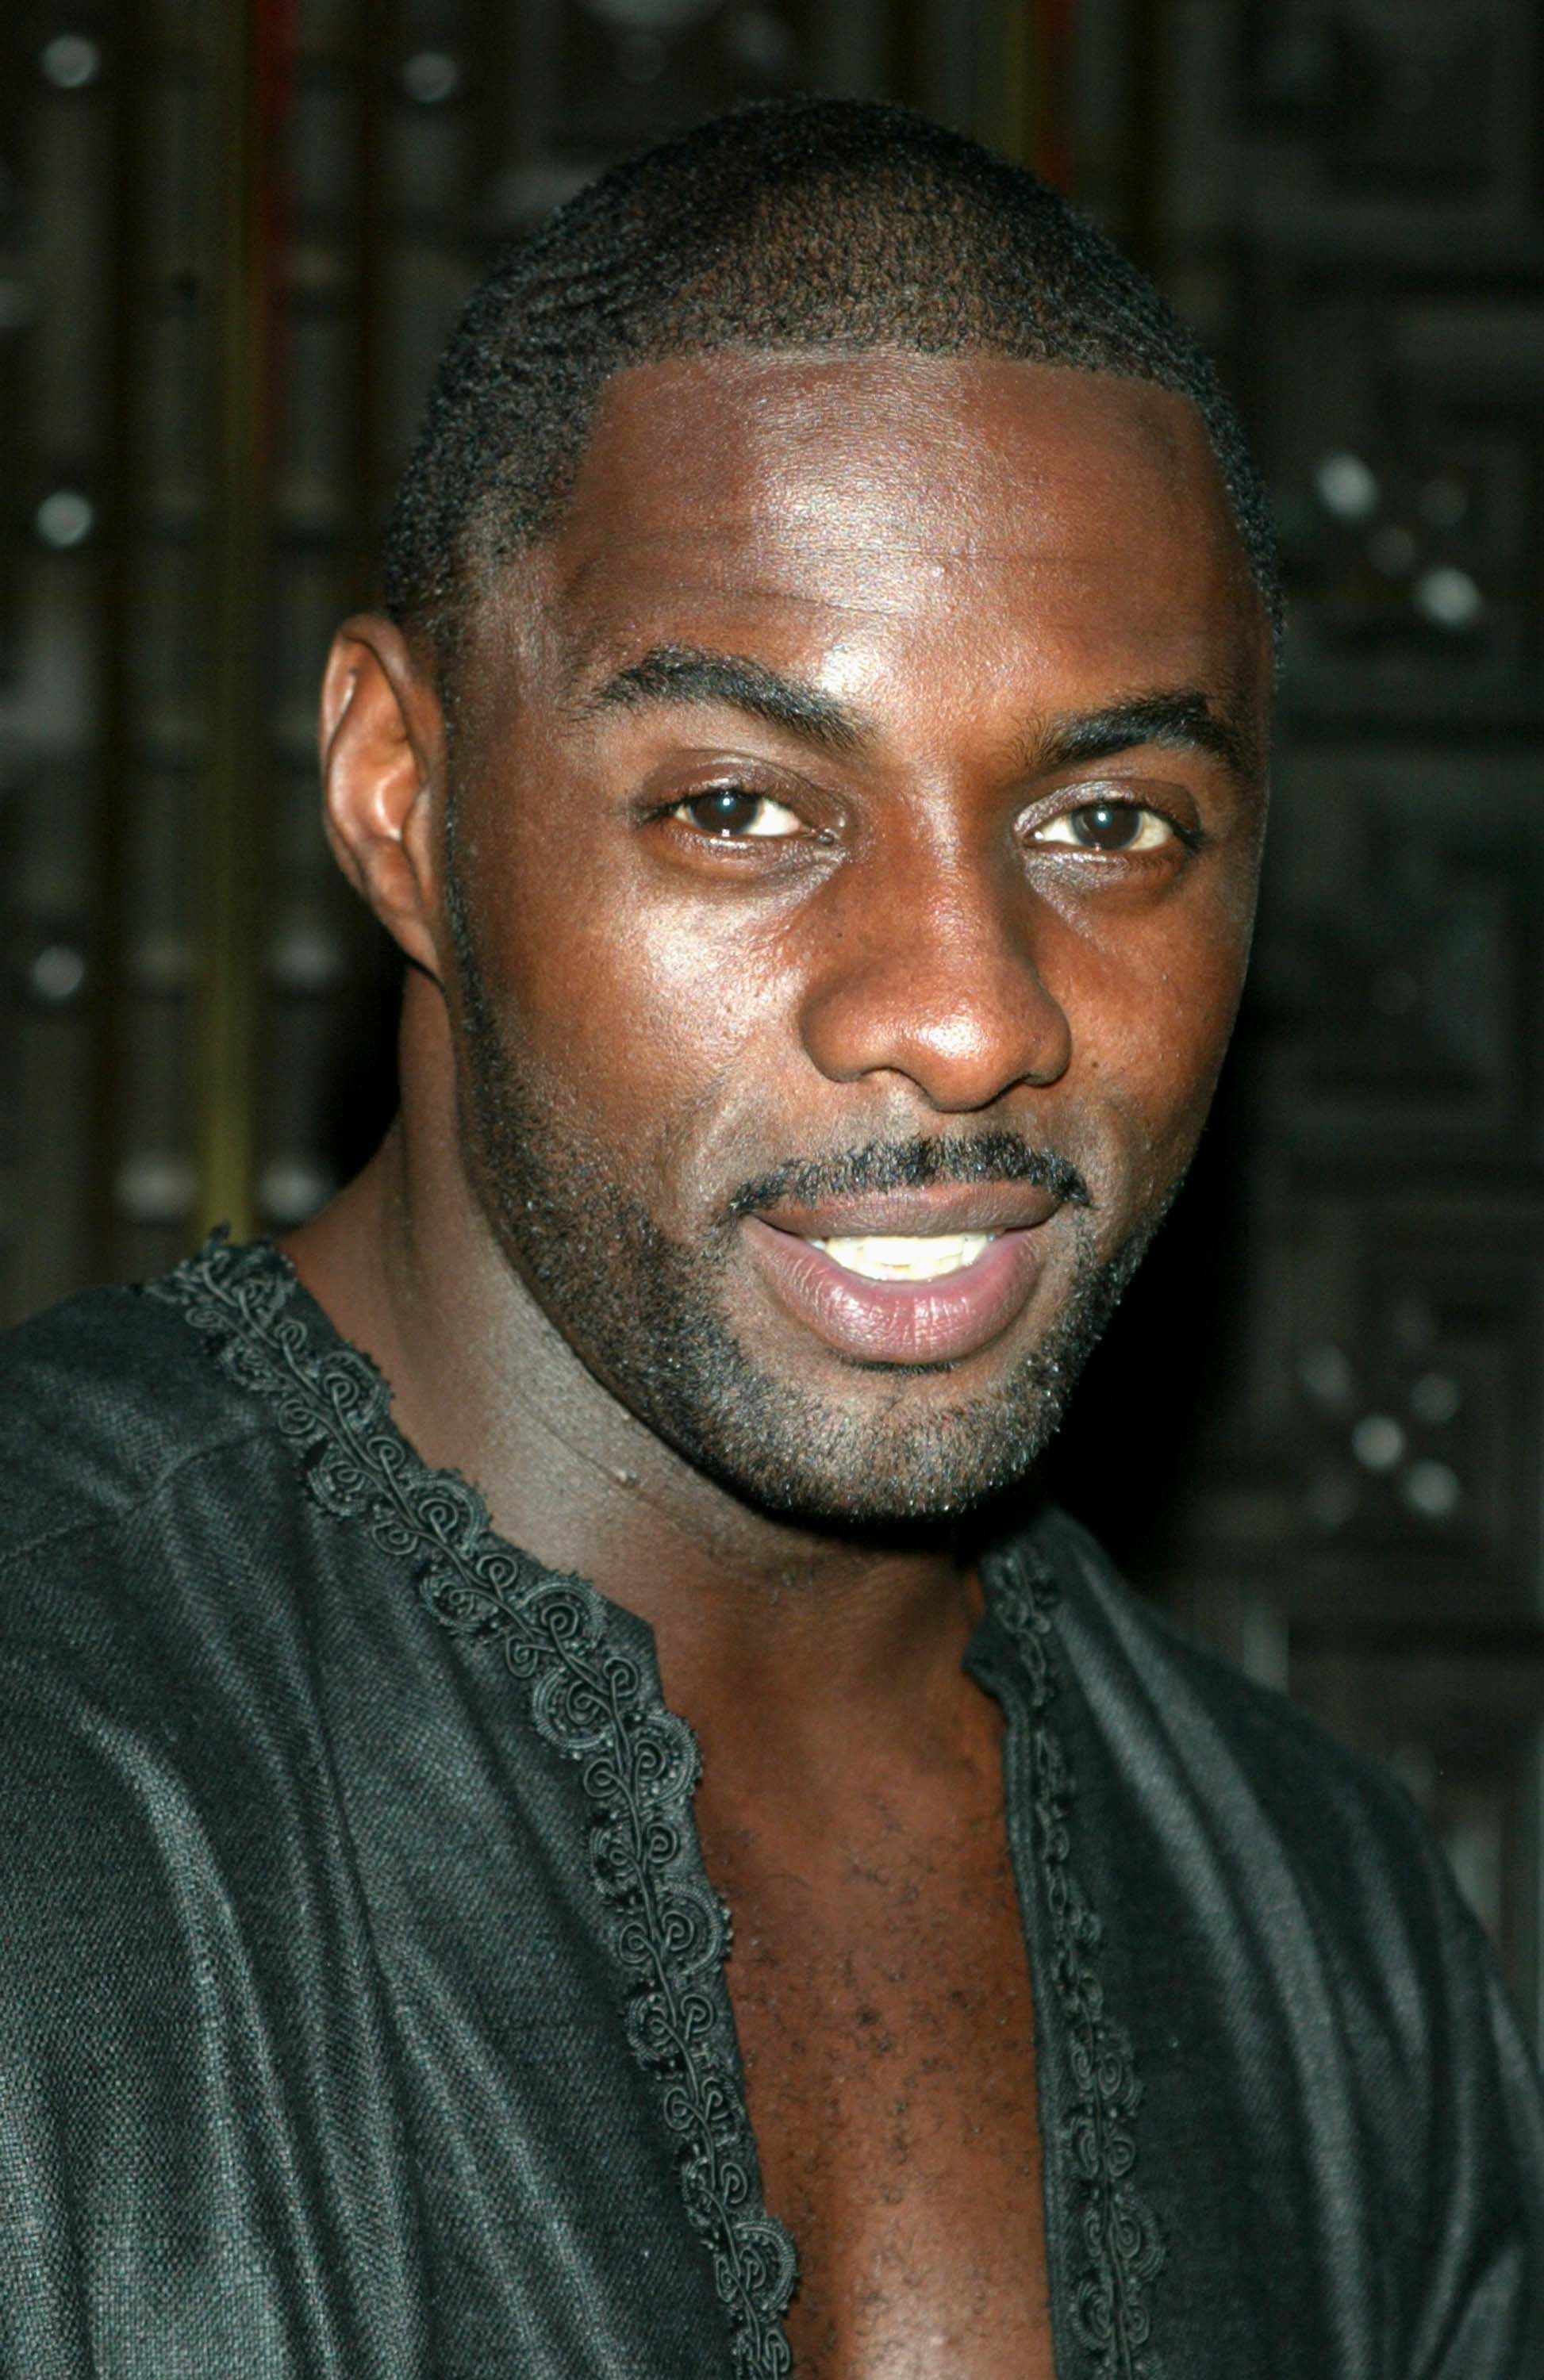 Idris Elba during "The Sopranos" 4th Season premiere on September 6, 2002 | Source: Getty Images